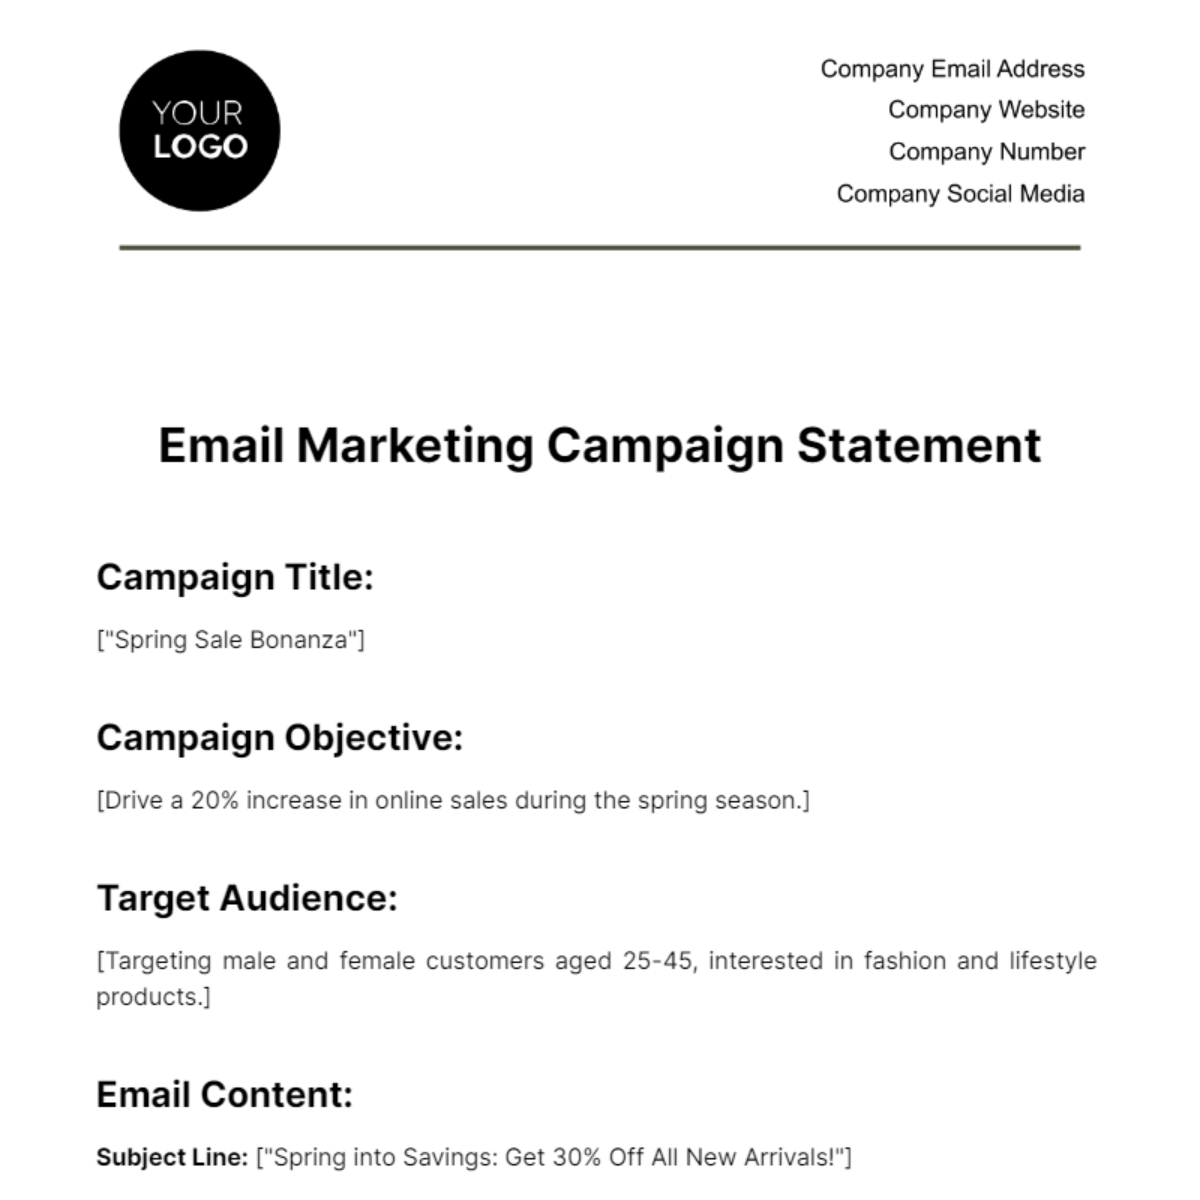 Email Marketing Campaign Statement Template